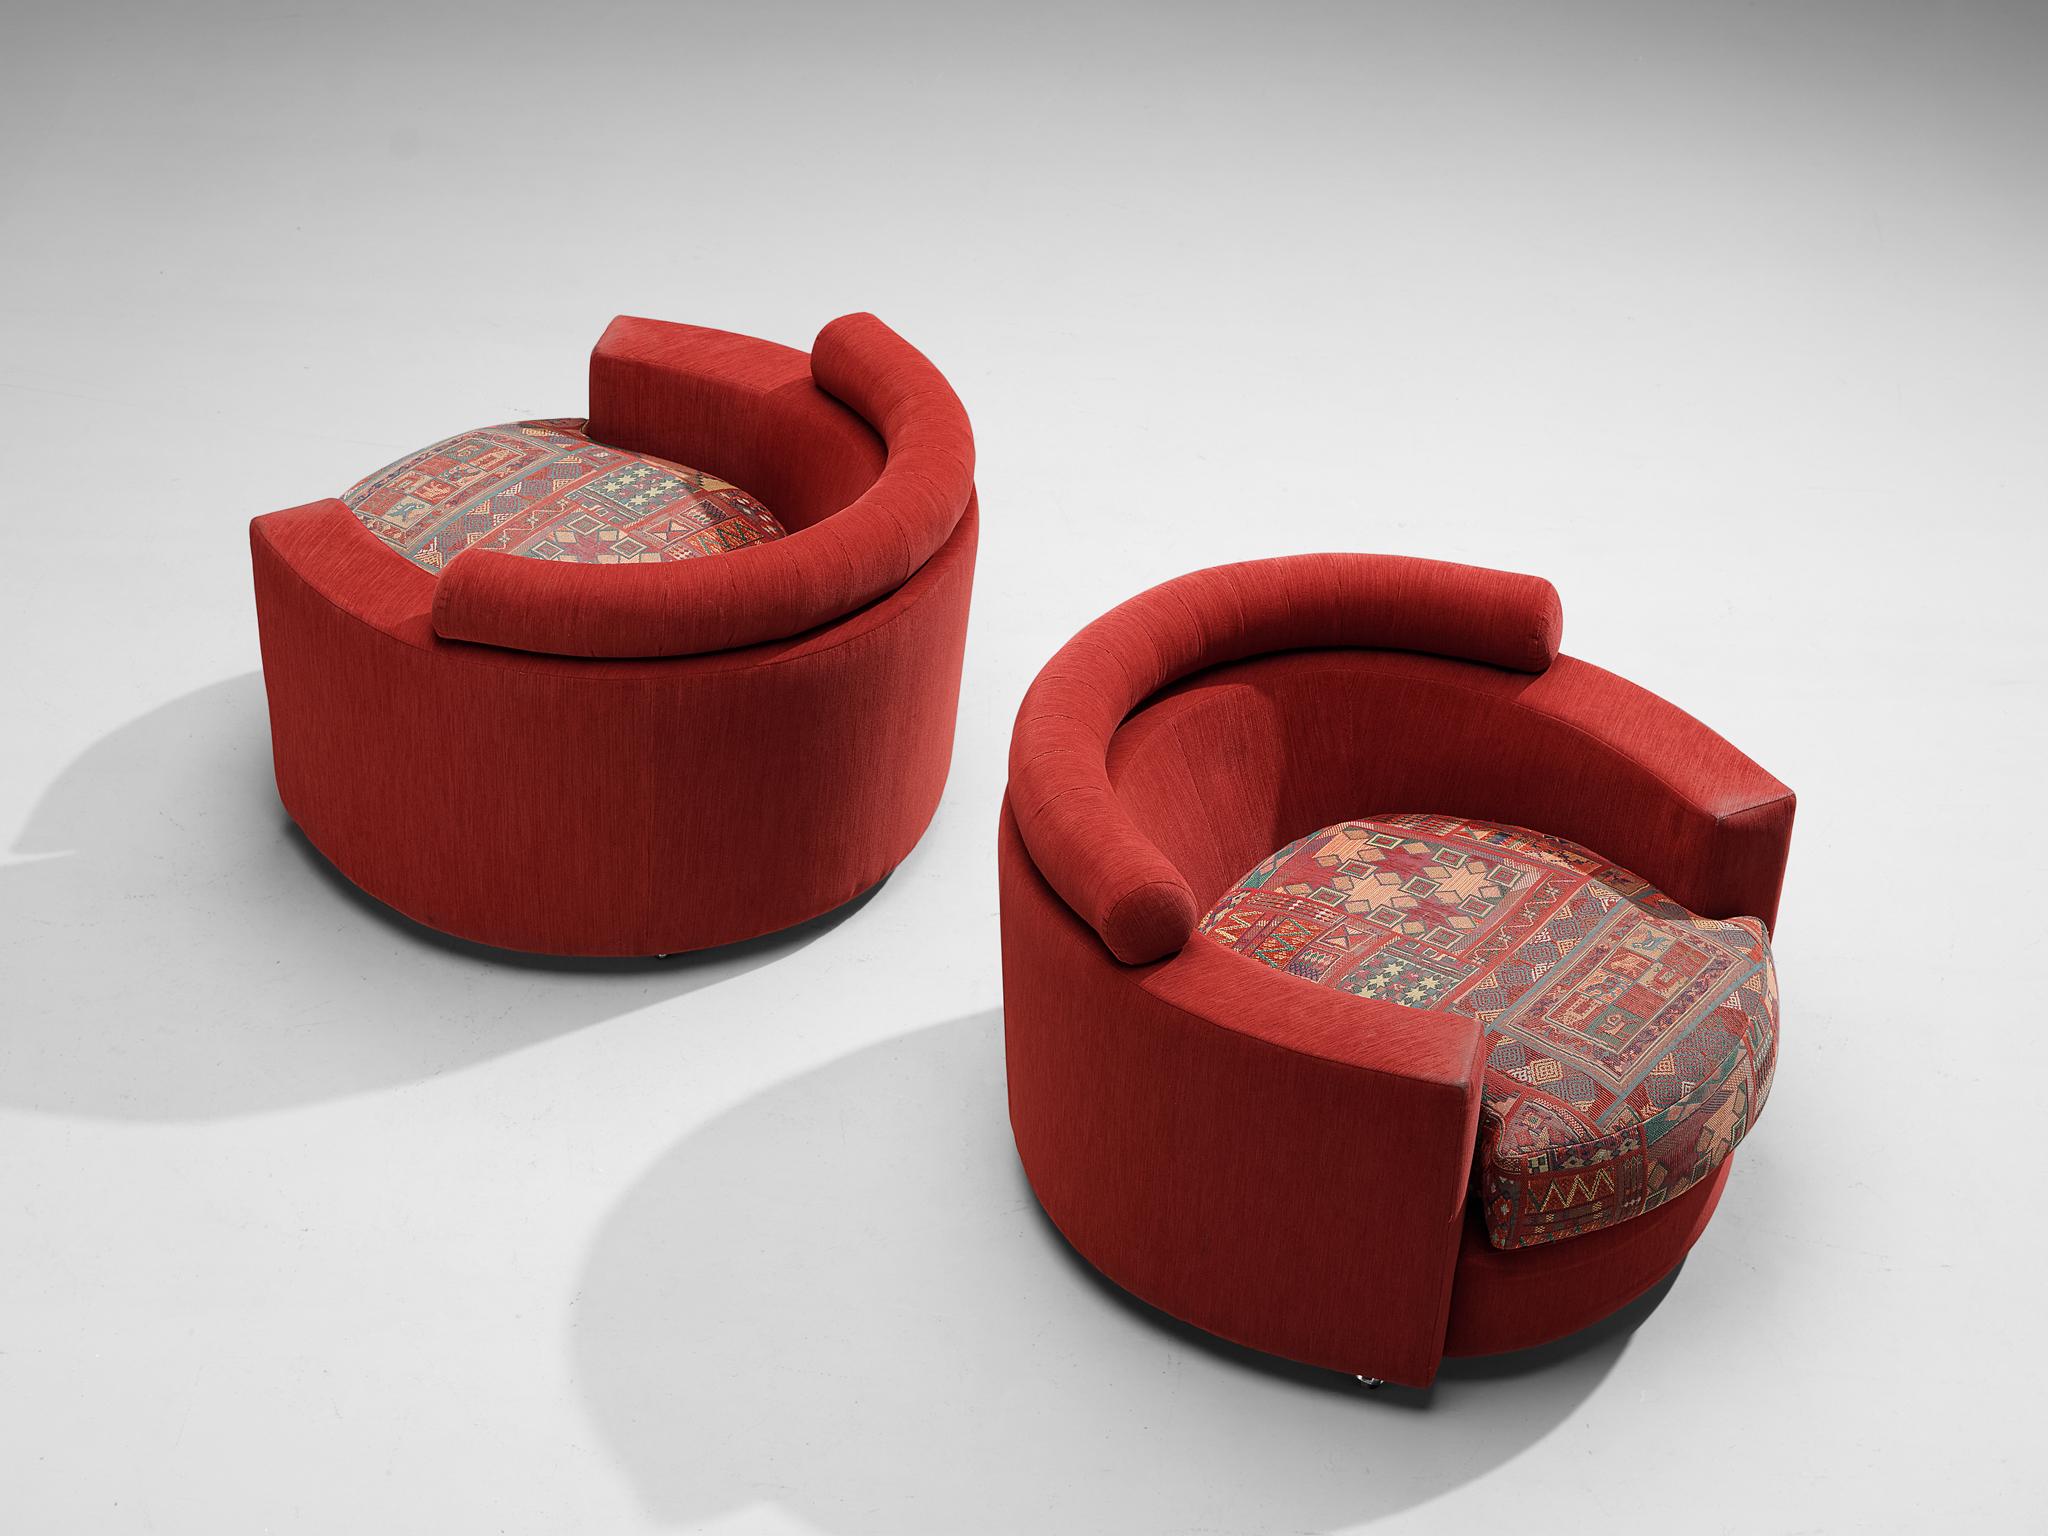 Roche Bobois, pair of armchairs, fabric, chrome, France, 1970s

These rare and wonderfully constructed chairs by Roche Bobois feature a solid construction of solely round shapes. The seating is designed as a shell that embraces the sitter